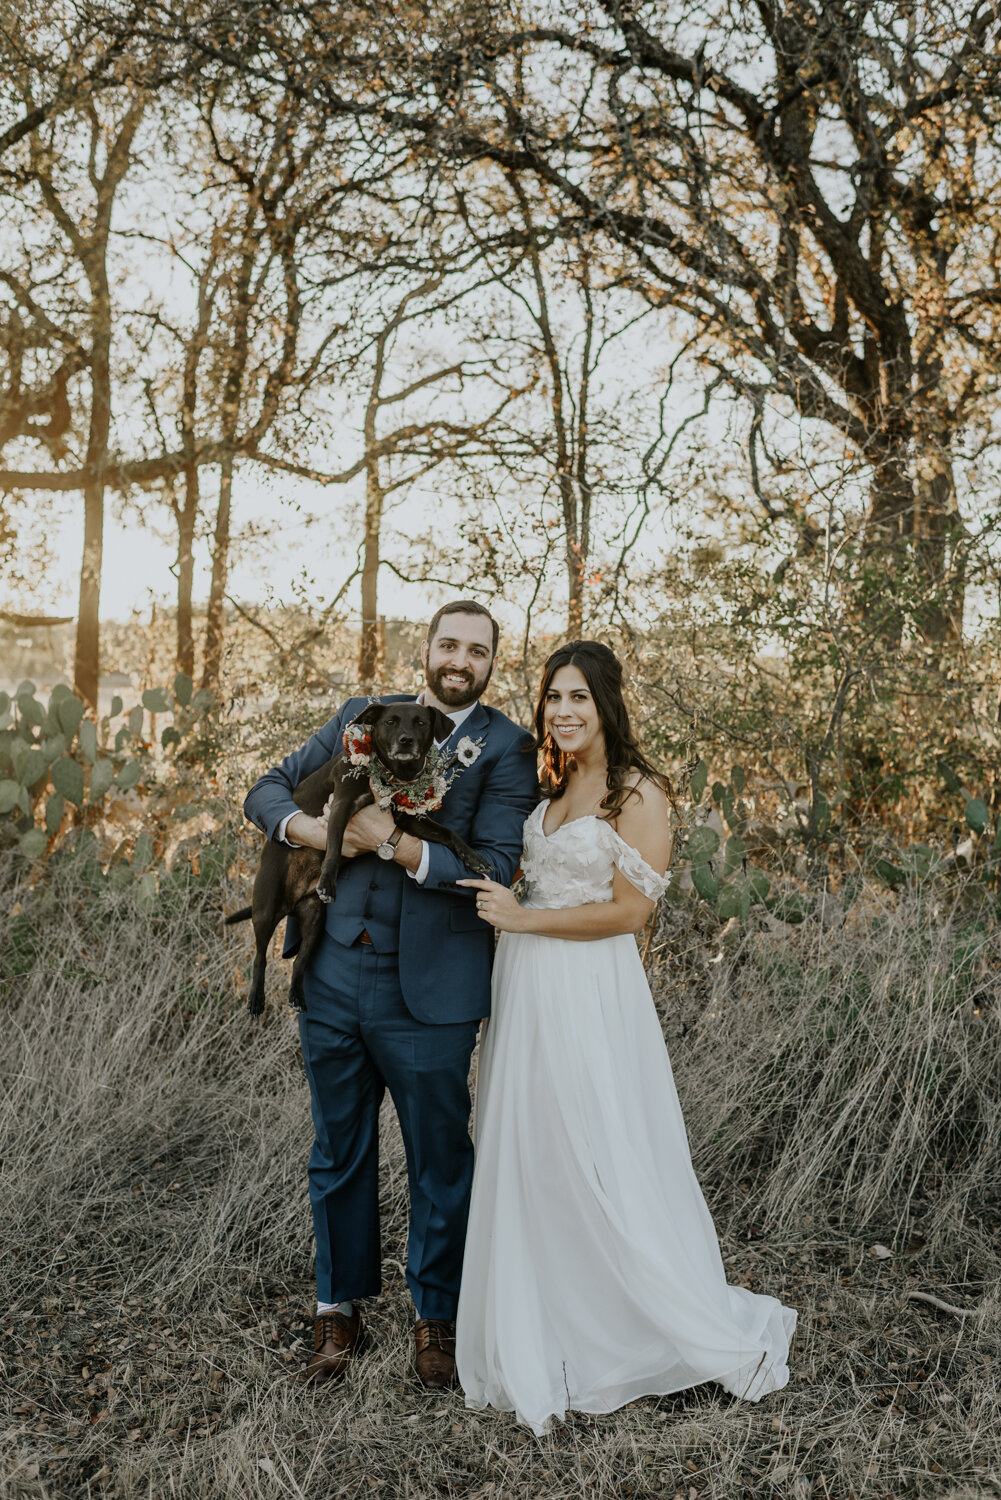 Cute bride and Groom photos with dog